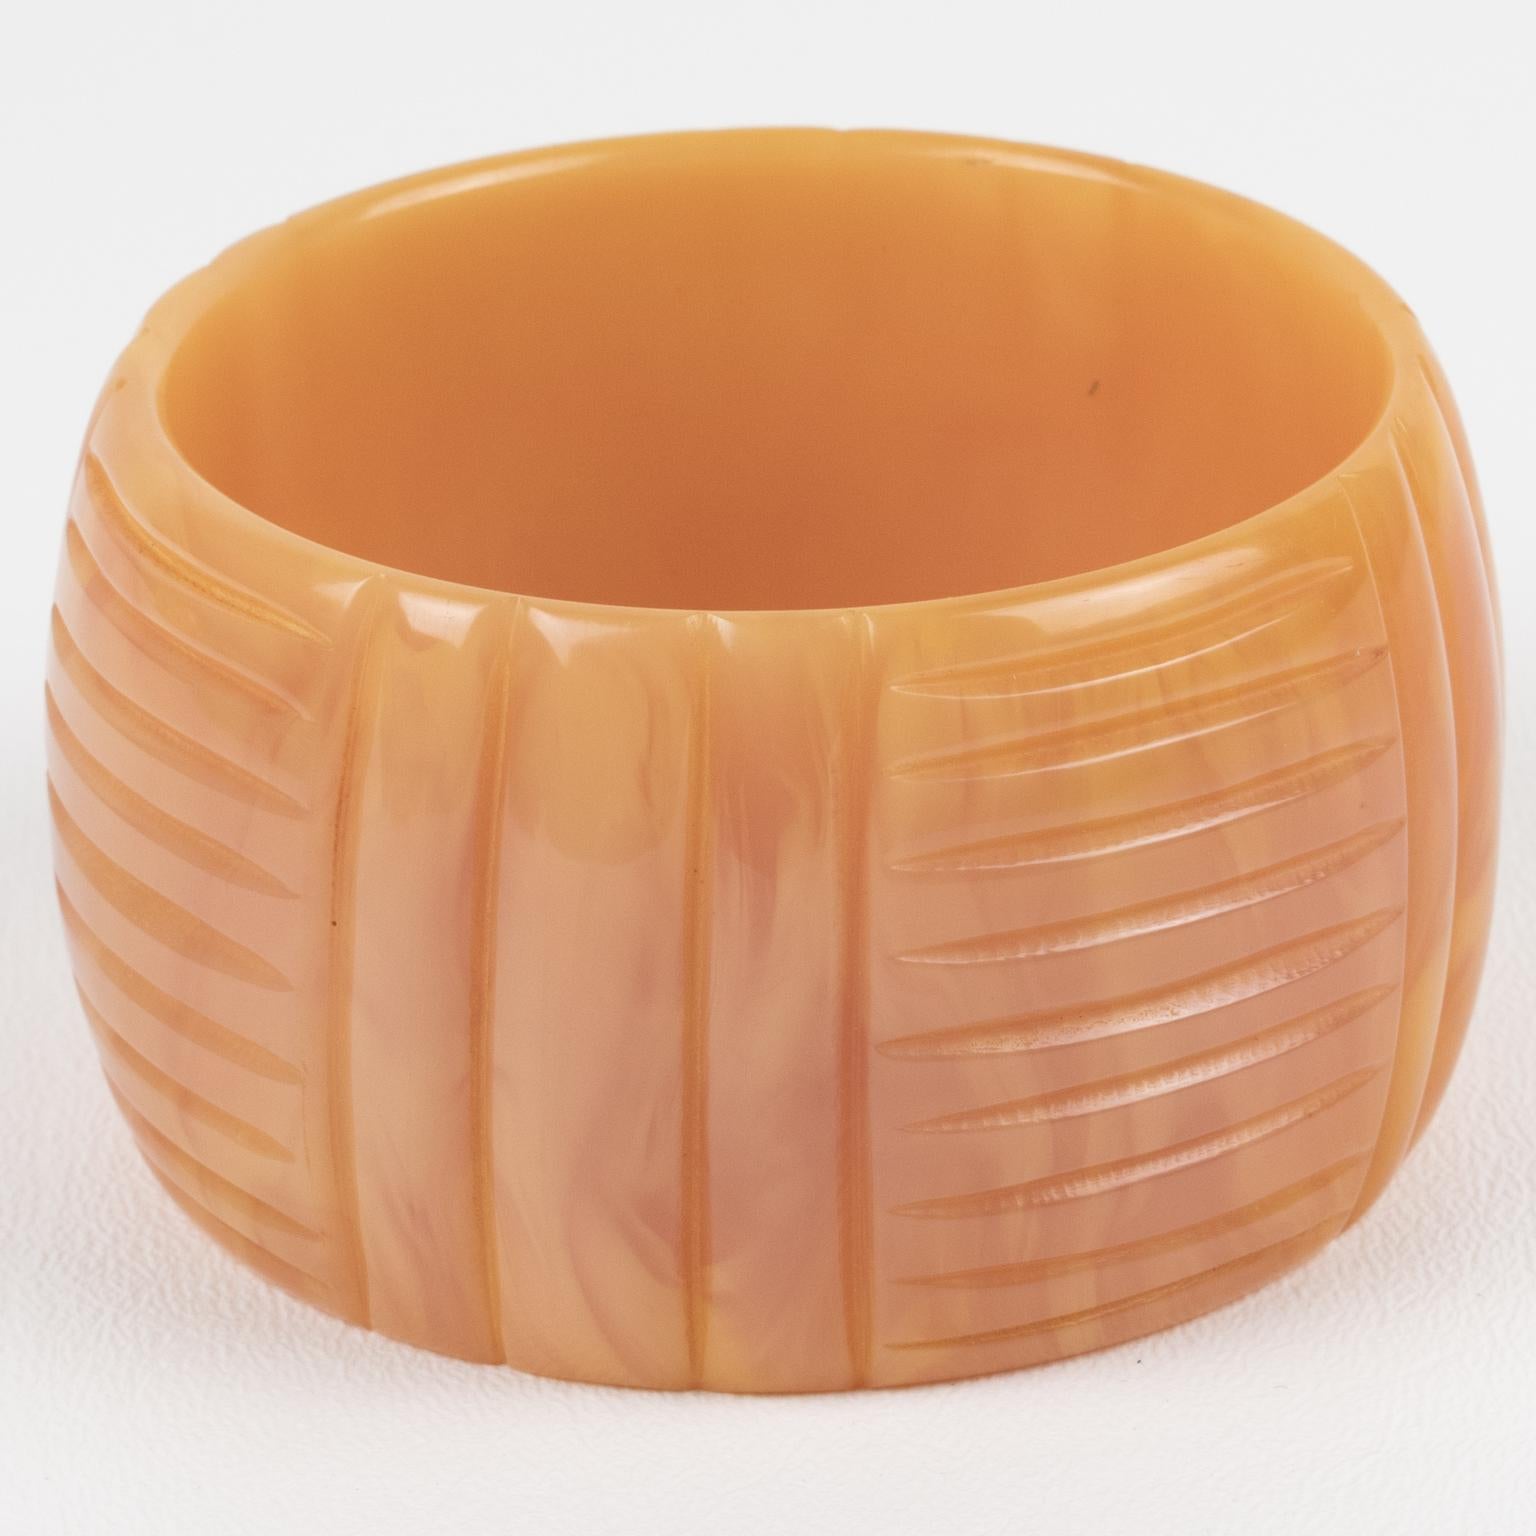 This is a gorgeous pink carnation marble Bakelite carved bracelet bangle. It features a chunky oversized domed shape with a geometric carving design. The color is an intense light powder pink with milky and pale yellow cloudy swirling.